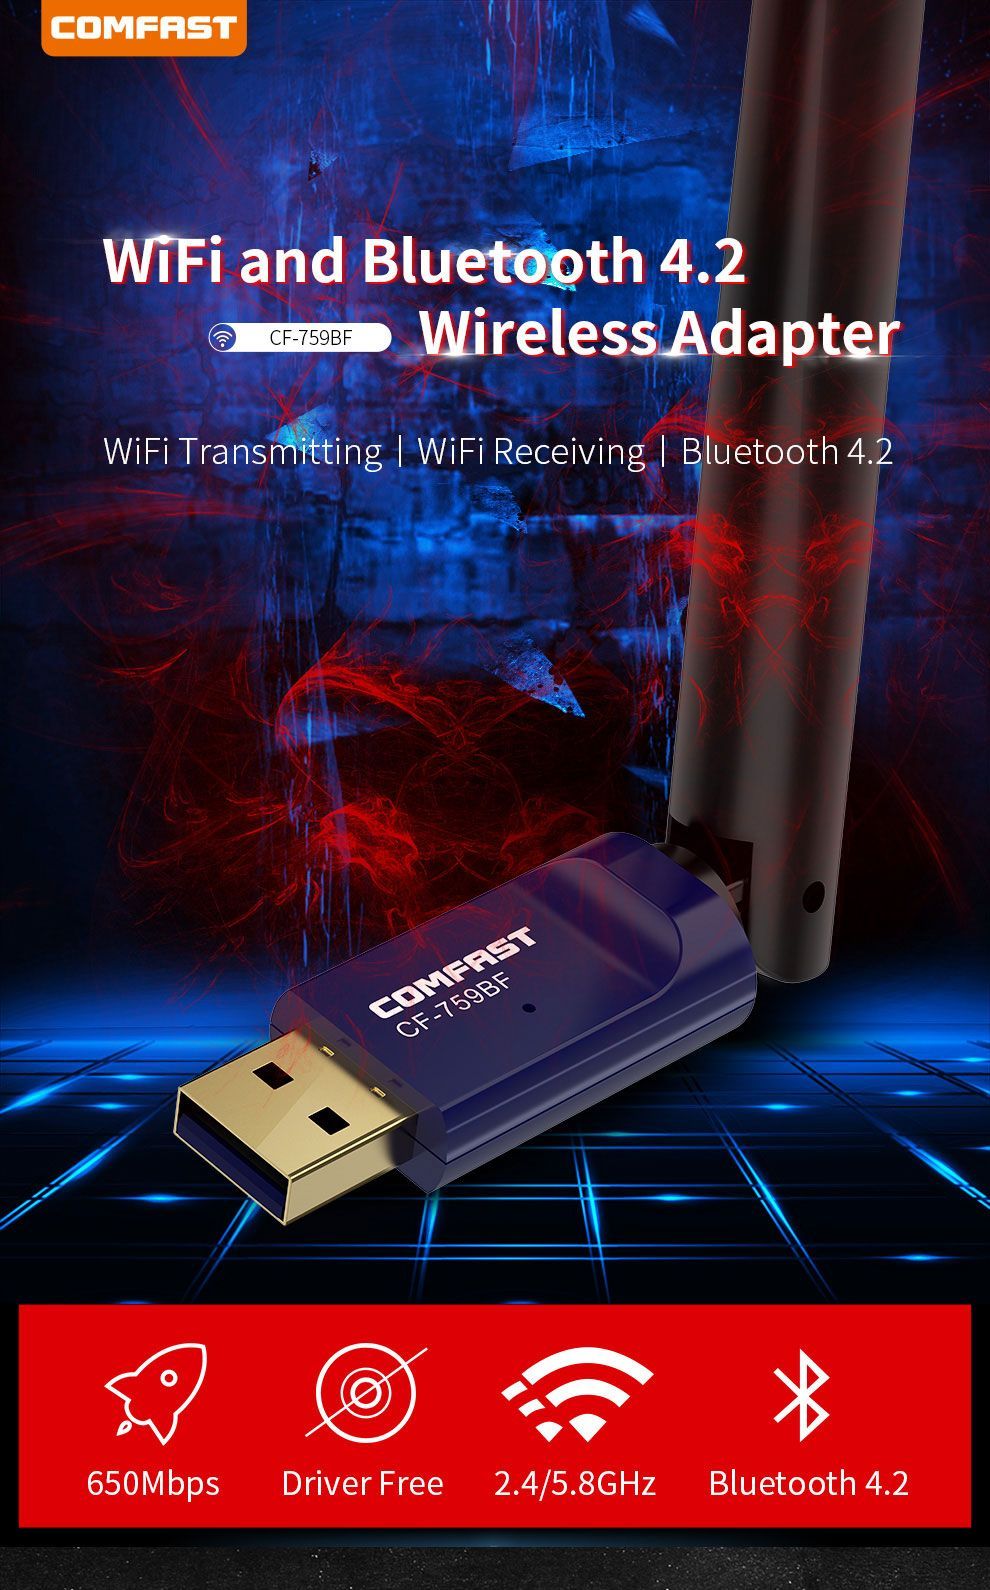 Comfast-WiFi-bluetooth-42-Wireless-Adapter-Data-Transmission-650Mbps-Dual-Band-Networking-Adapter-Dr-1572188